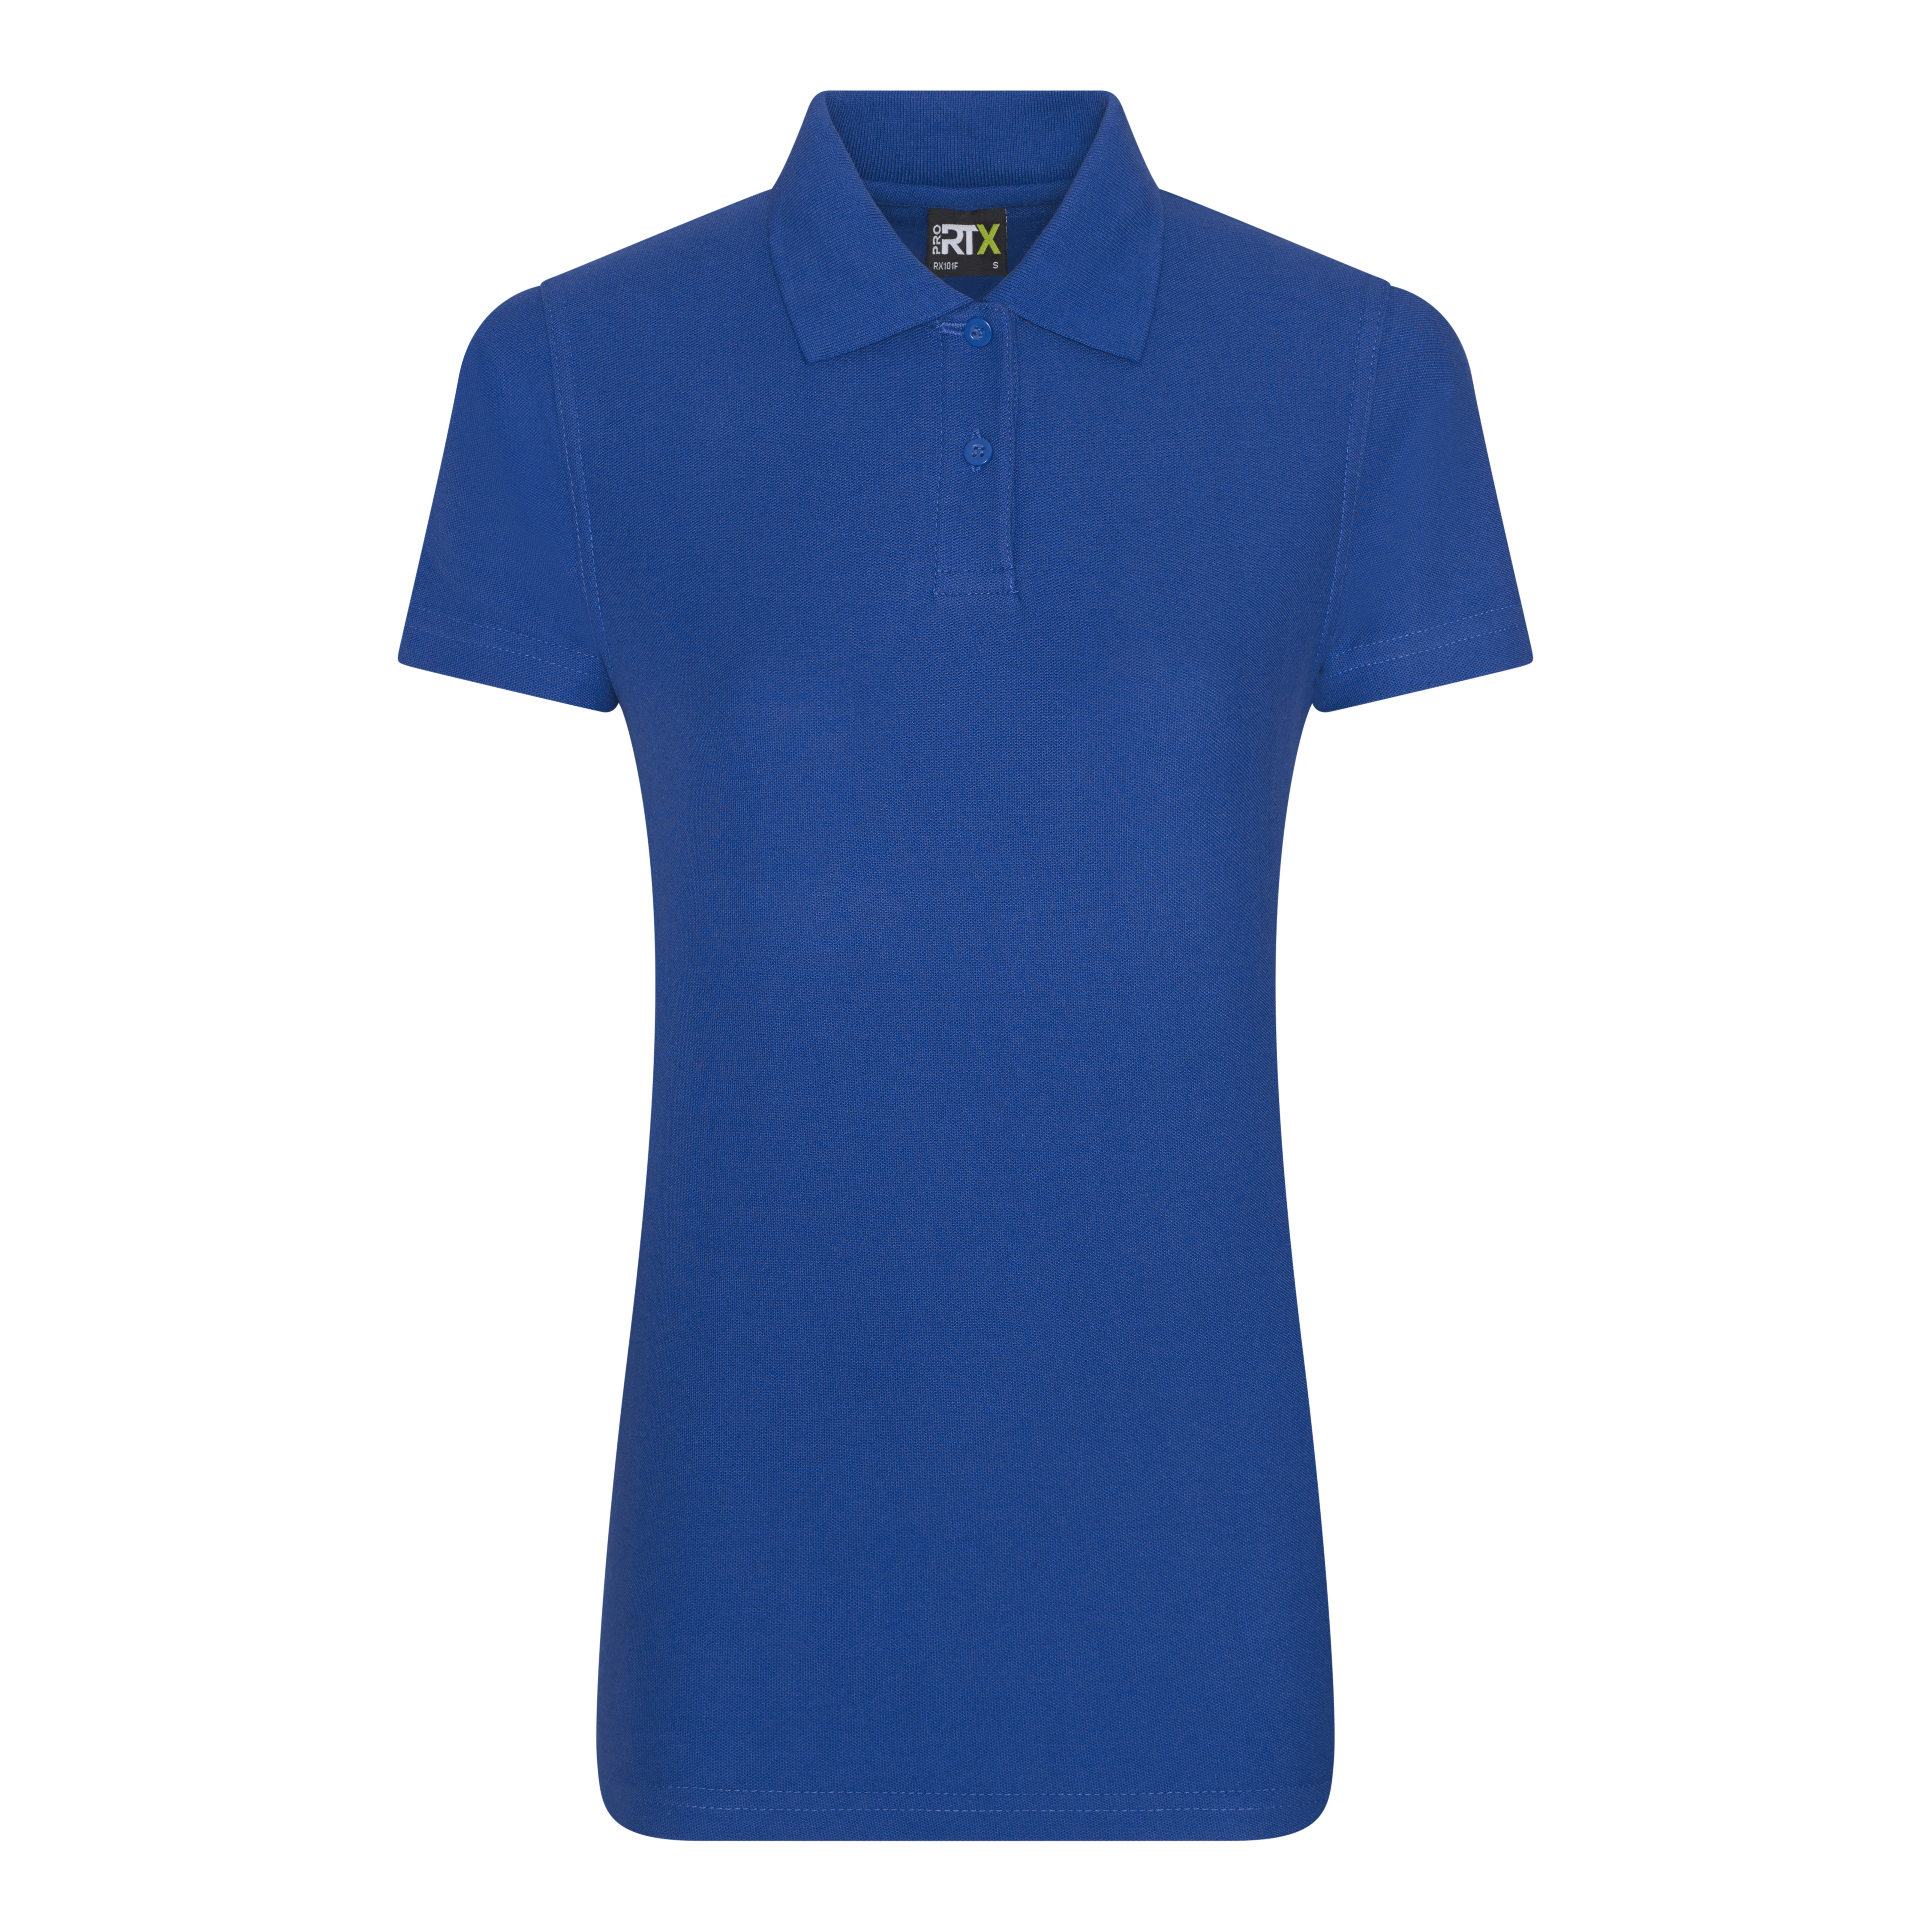 ax-httpswebsystems.s3.amazonaws.comtmp_for_downloadpro-rtx-ladies-pro-polo-royal-blue.jpg